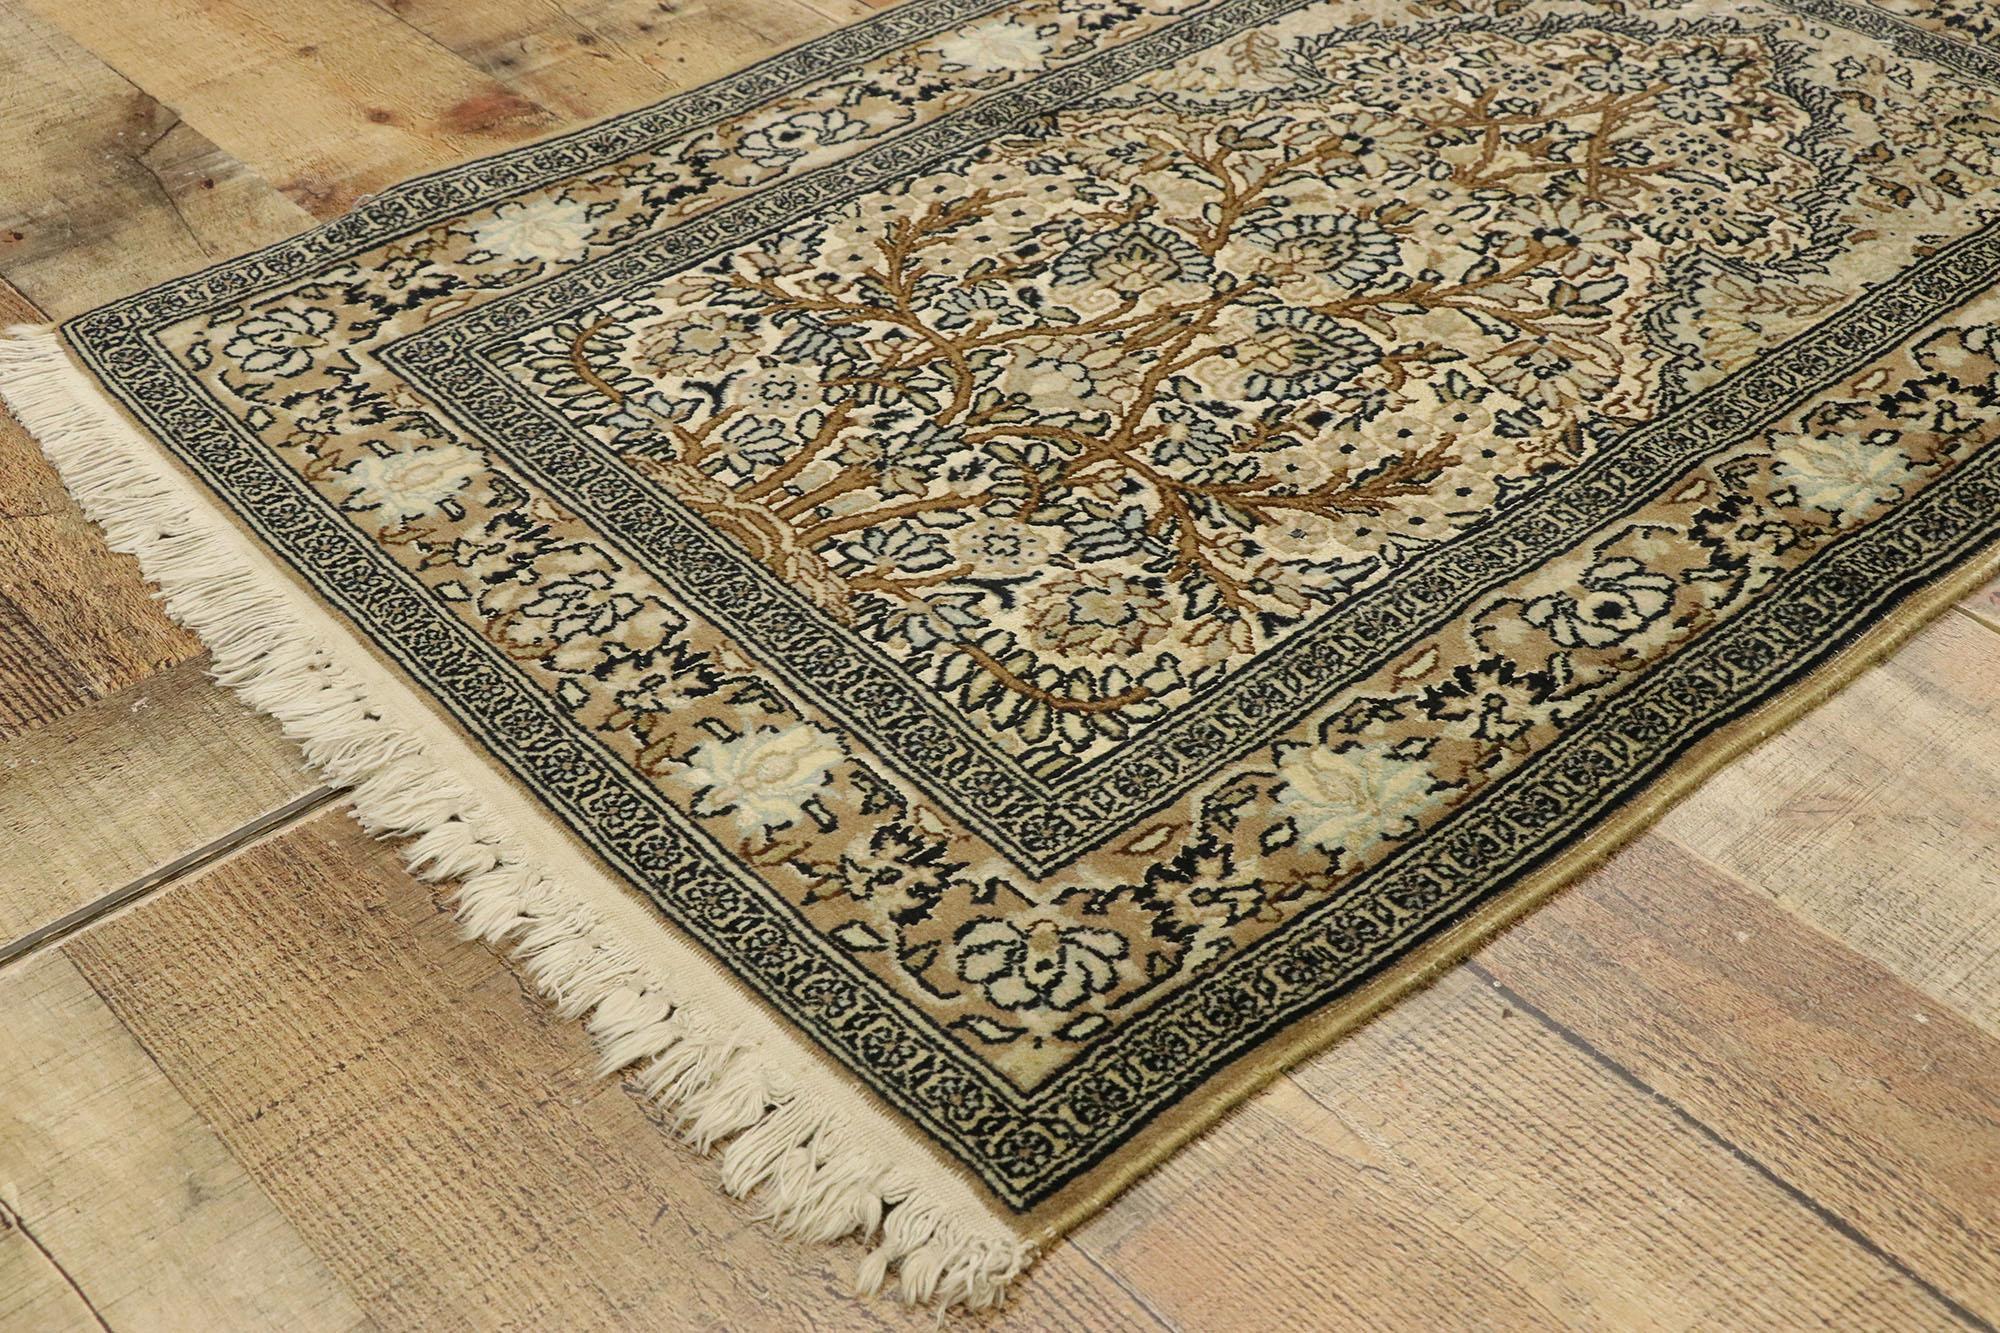 20th Century Vintage Pakistani Persian Style Prayer Rug with Directional Layout Design